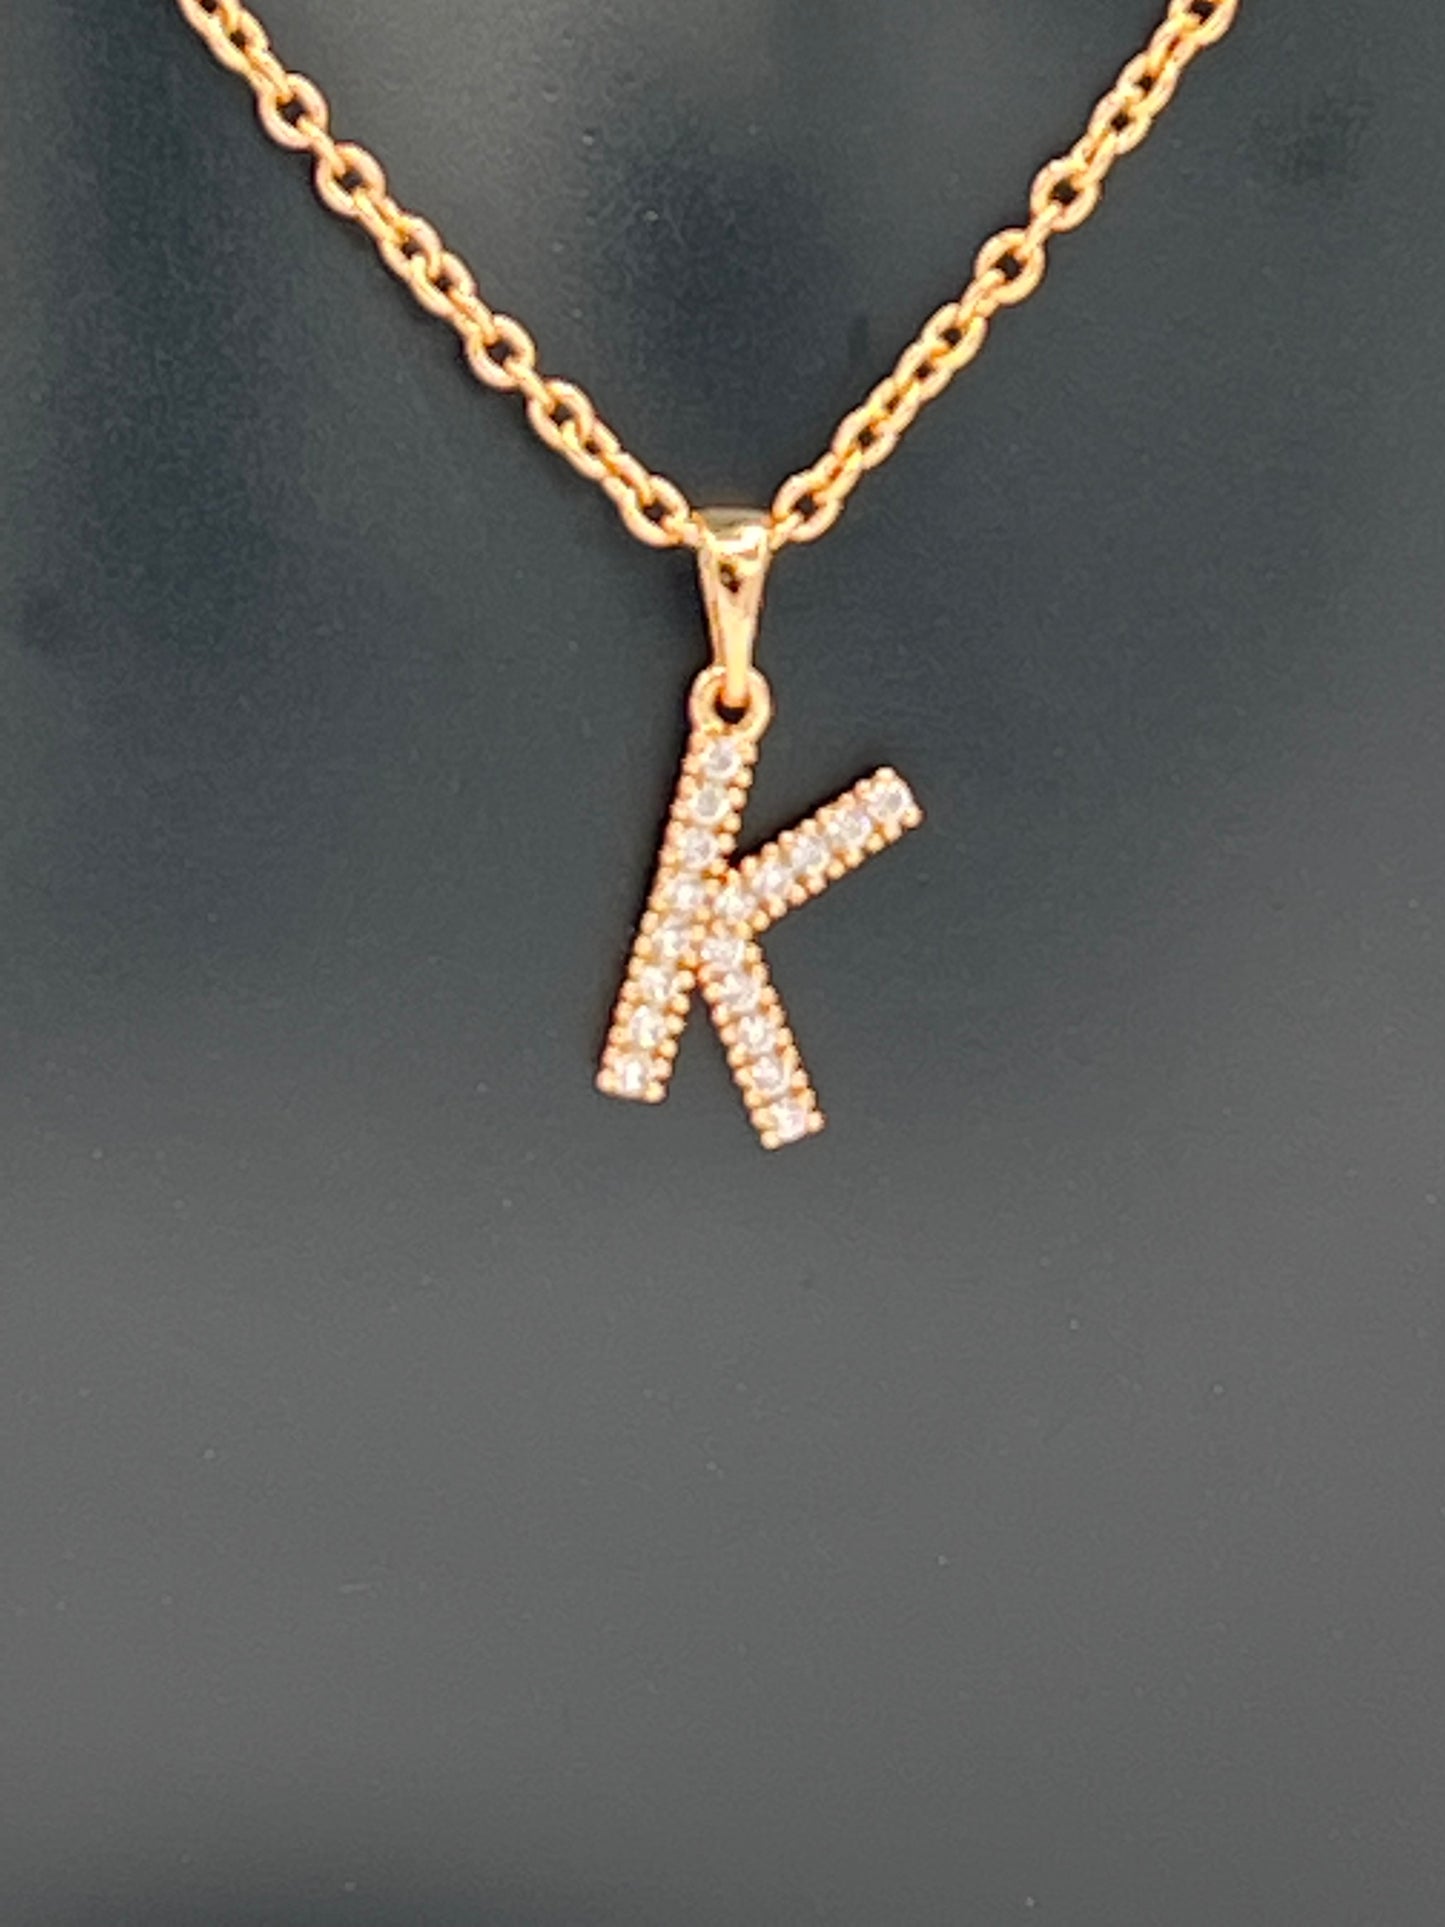 Personalized Elegance: Gold Plated Initial Pendant Necklace - Elevate Your Style with Customized and Timeless Jewelry